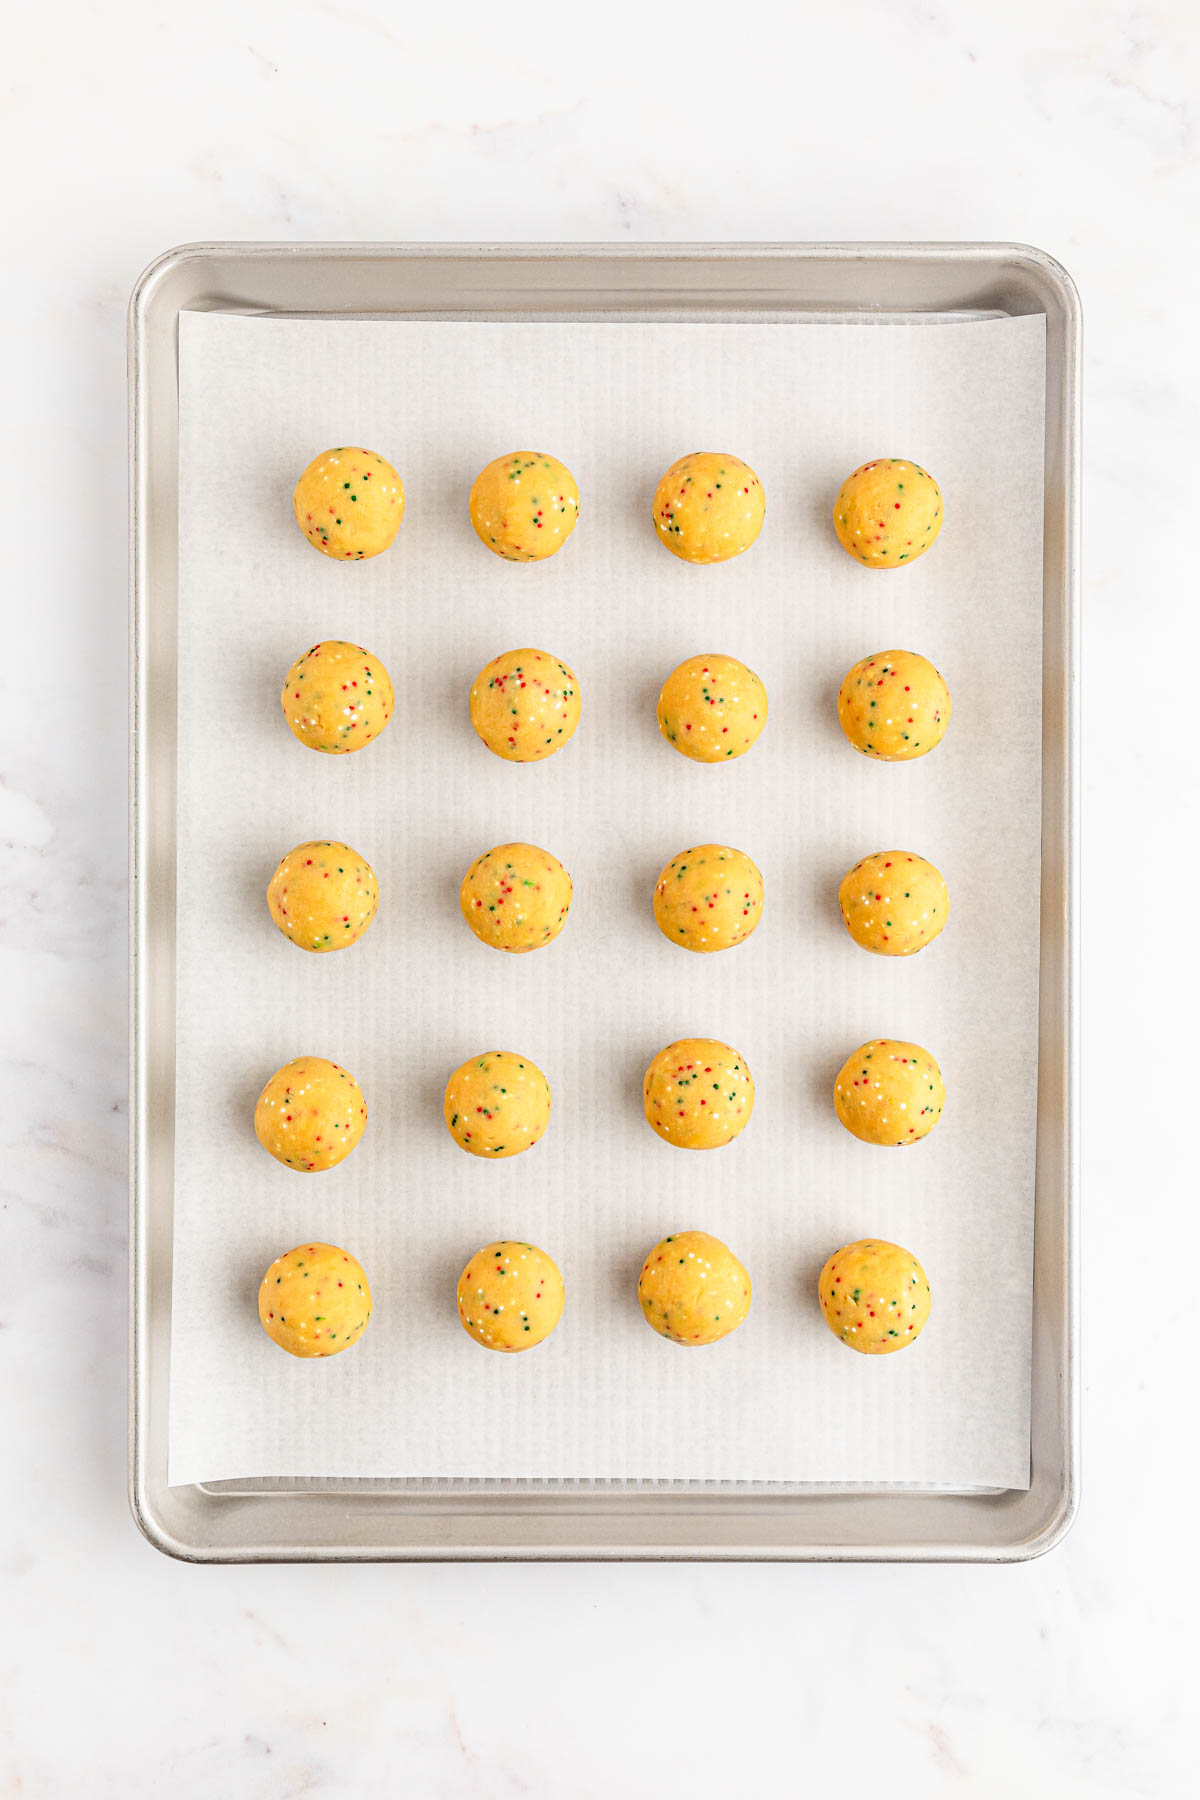 A baking sheet with yellow Oreo balls on it.